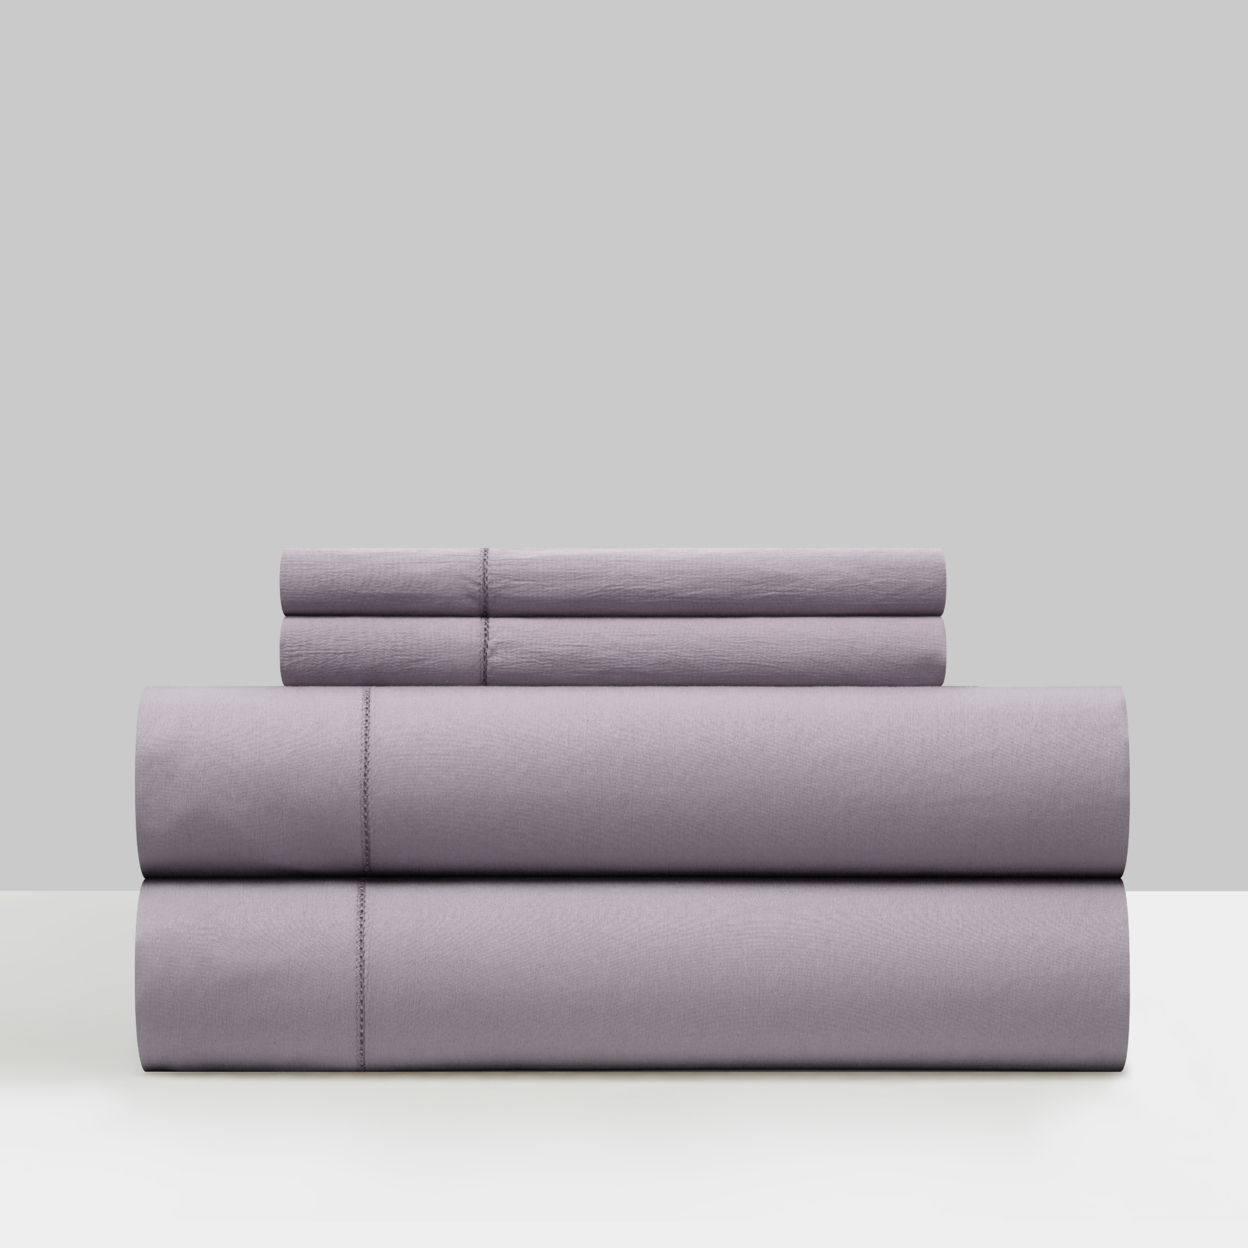 Daisy 3 Or 4 Piece Sheet Set Solid Color Washed Garment Technique - Lavender, Twin